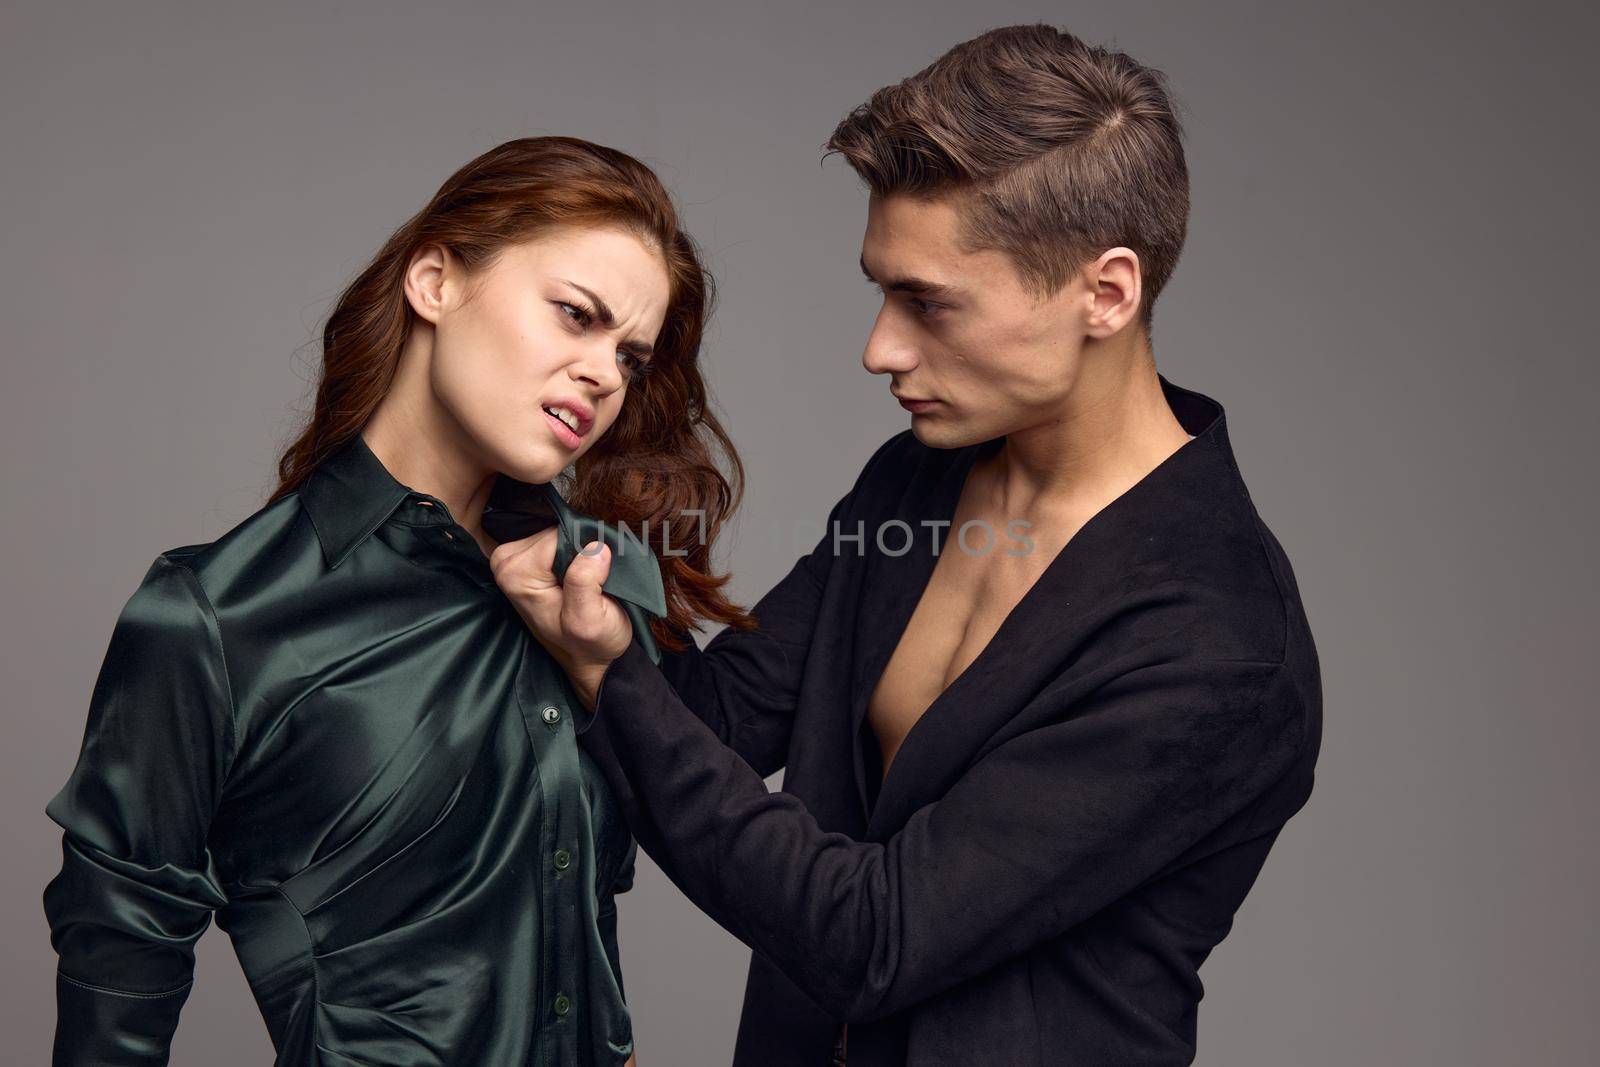 A man holds a woman by the collar causing her pain and on a gray background by SHOTPRIME